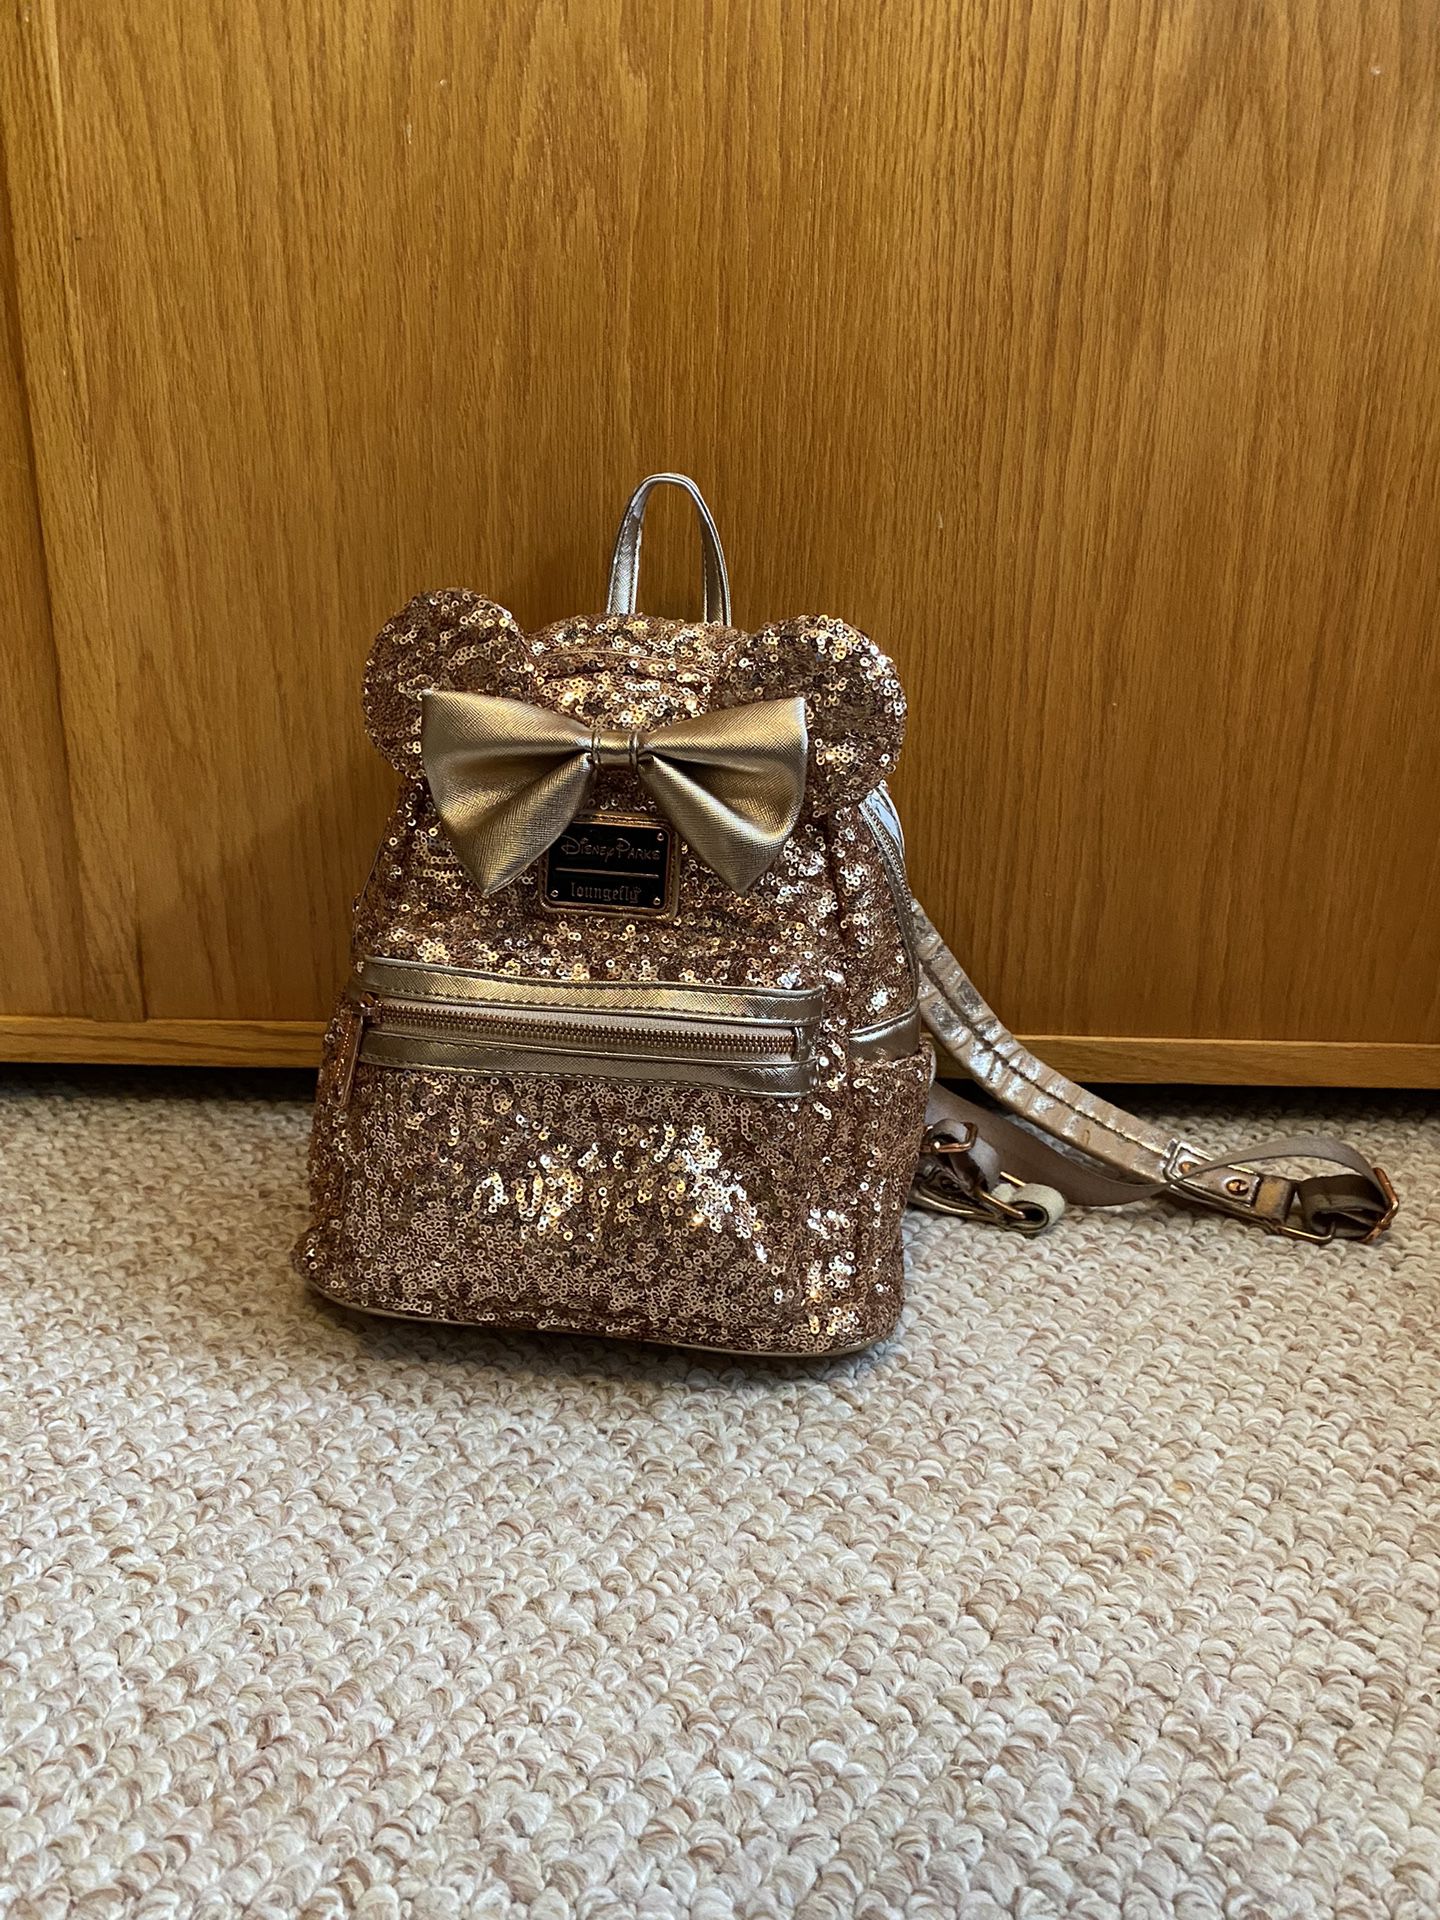 Disney Sequin Minnie Mouse Mini Backpack $30 OBO